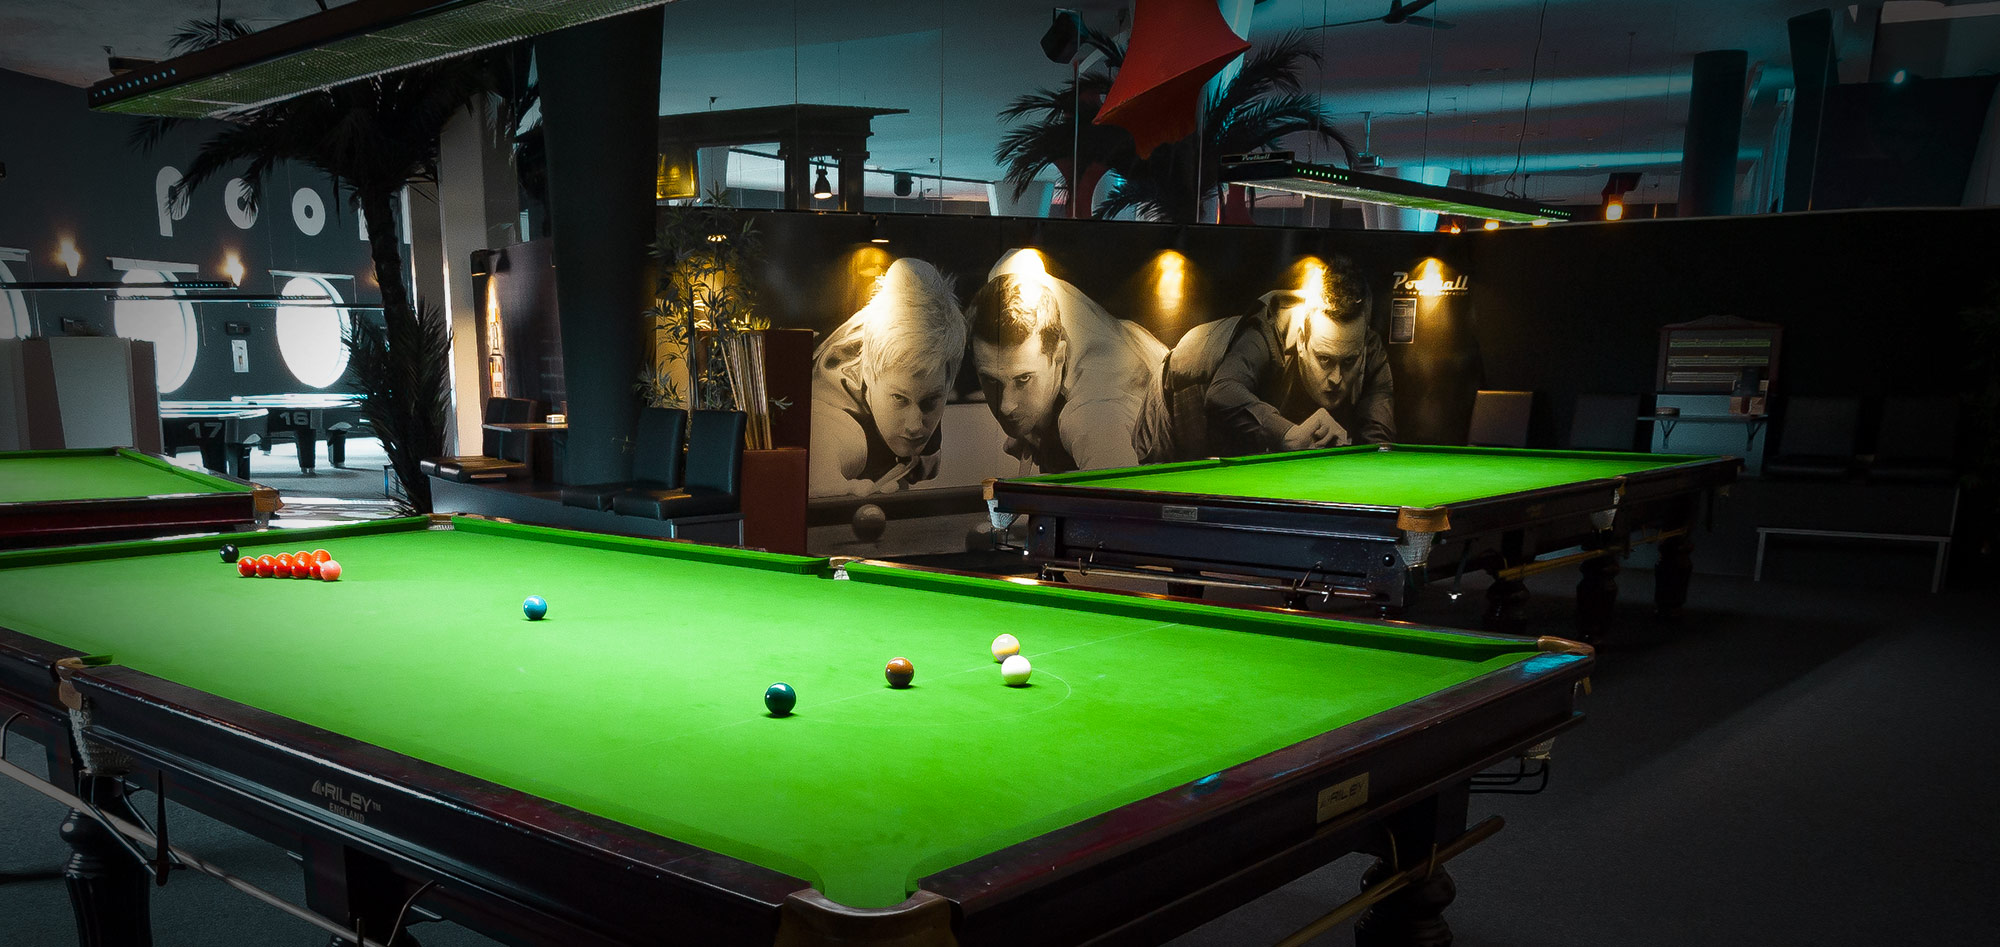 snooker_poolhall_linz